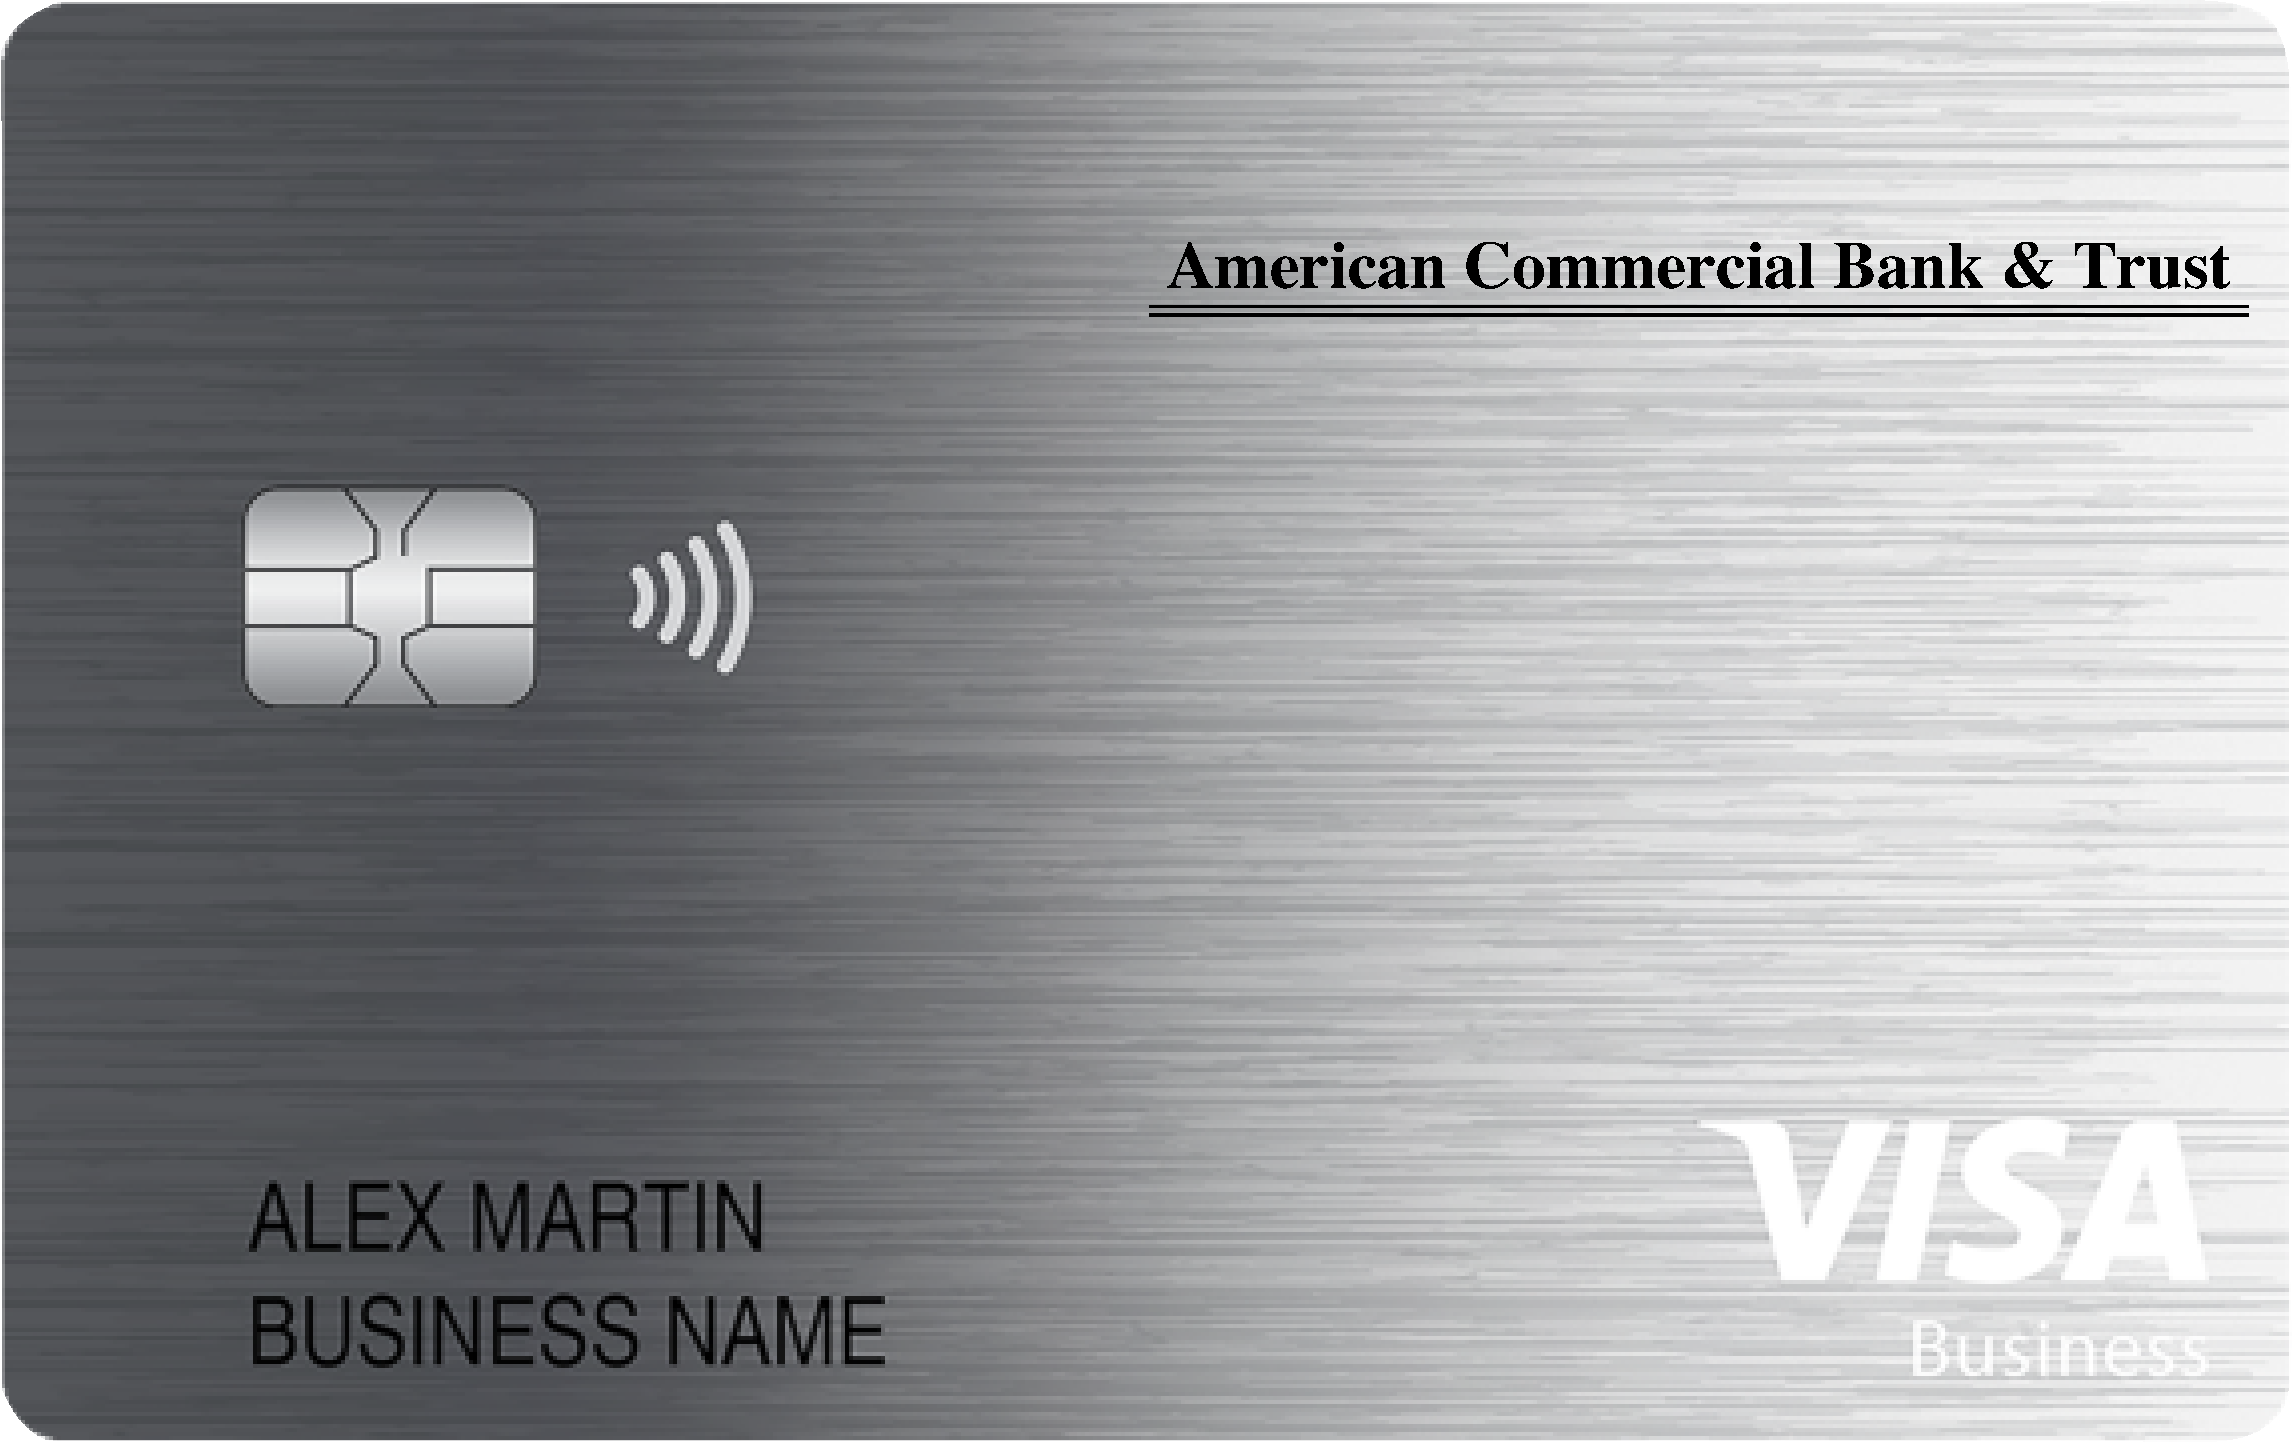 American Commercial Bank & Trust Business Real Rewards Card